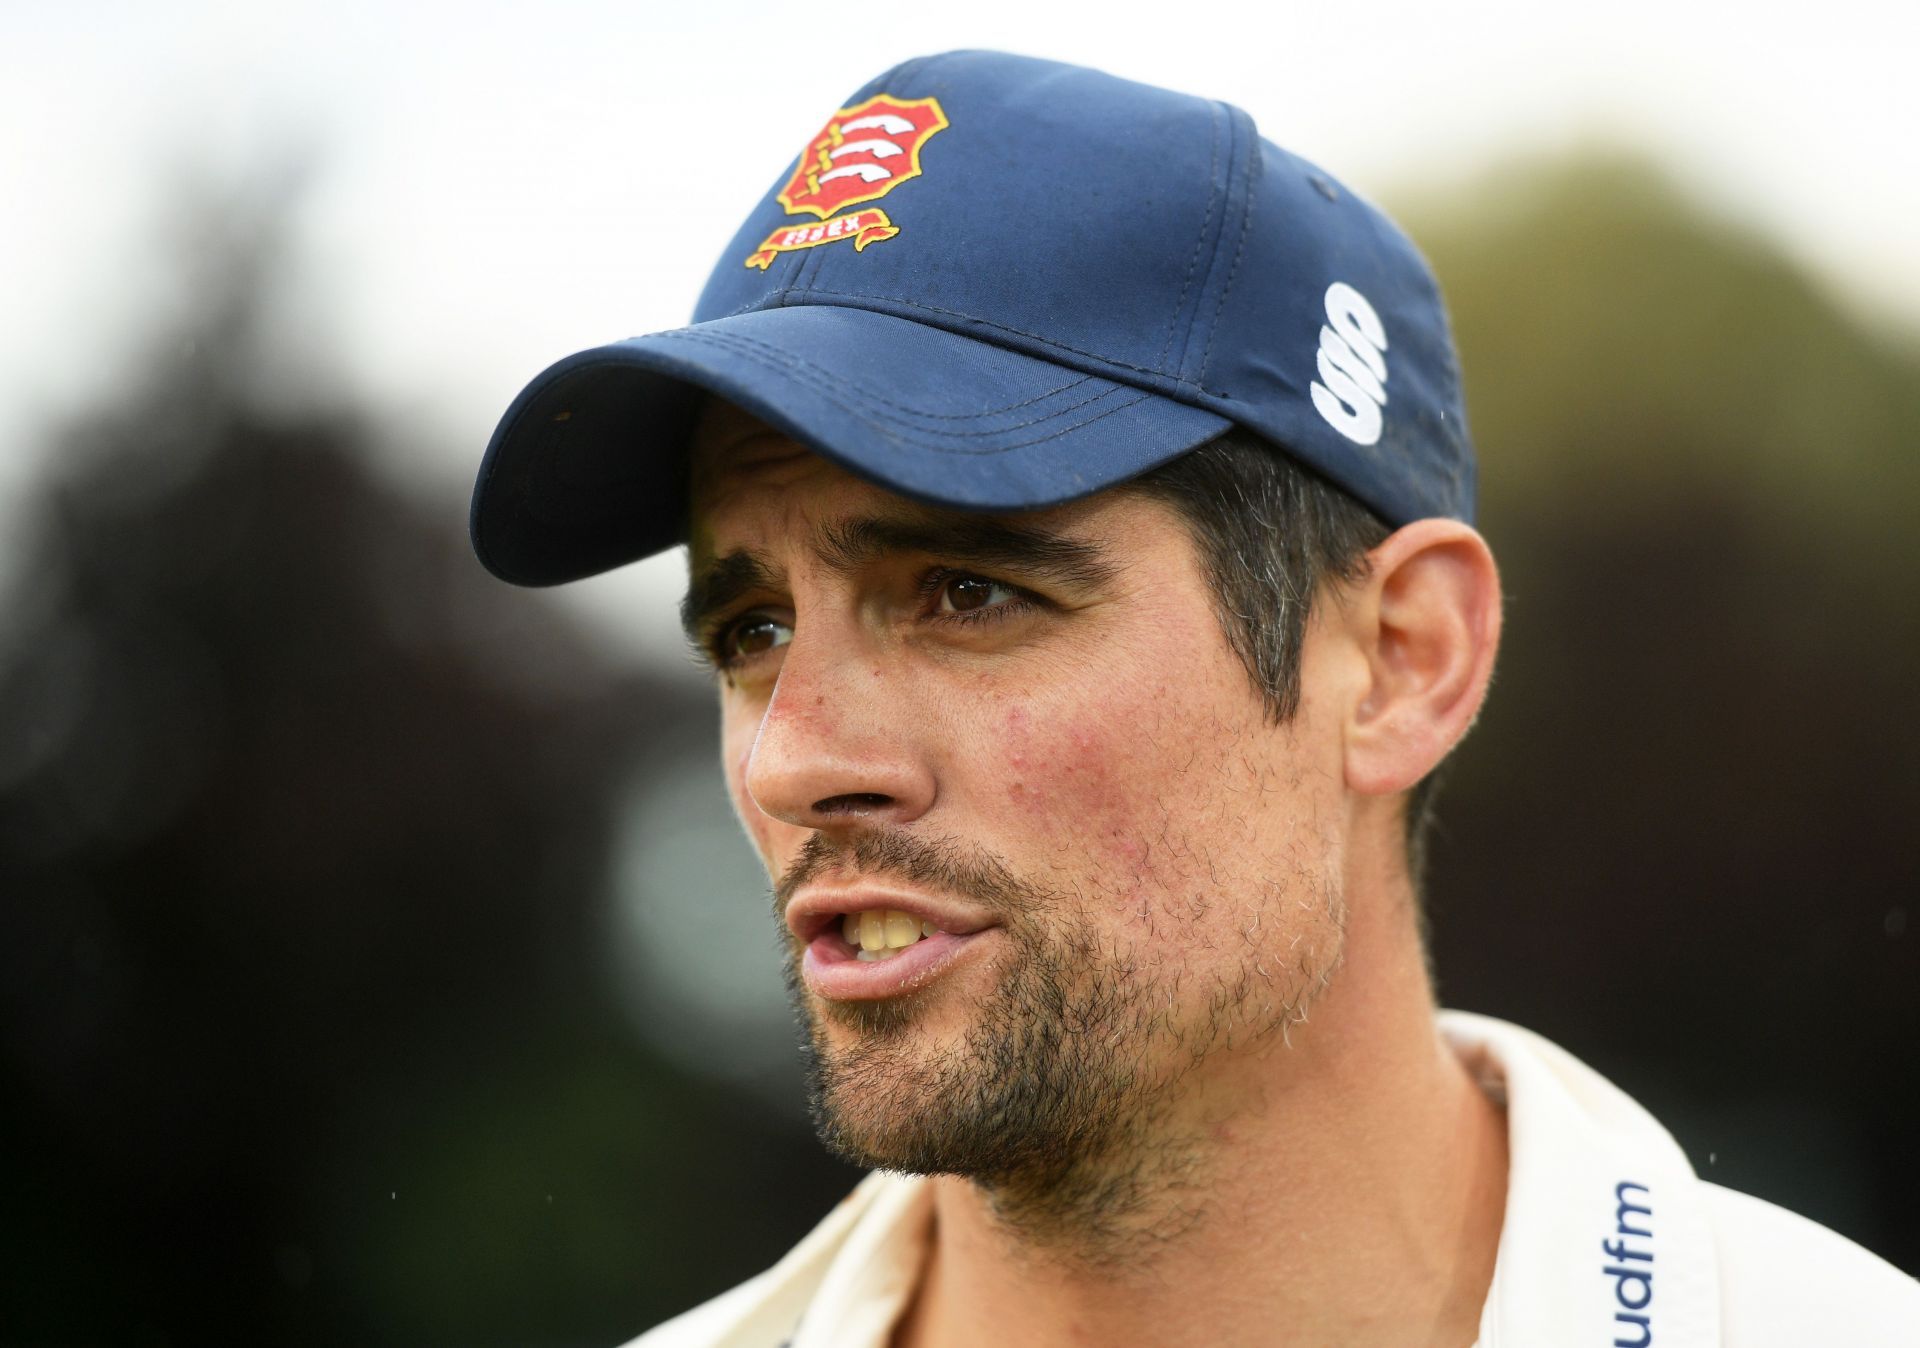 Alastair Cook. (Credits: Getty Images)